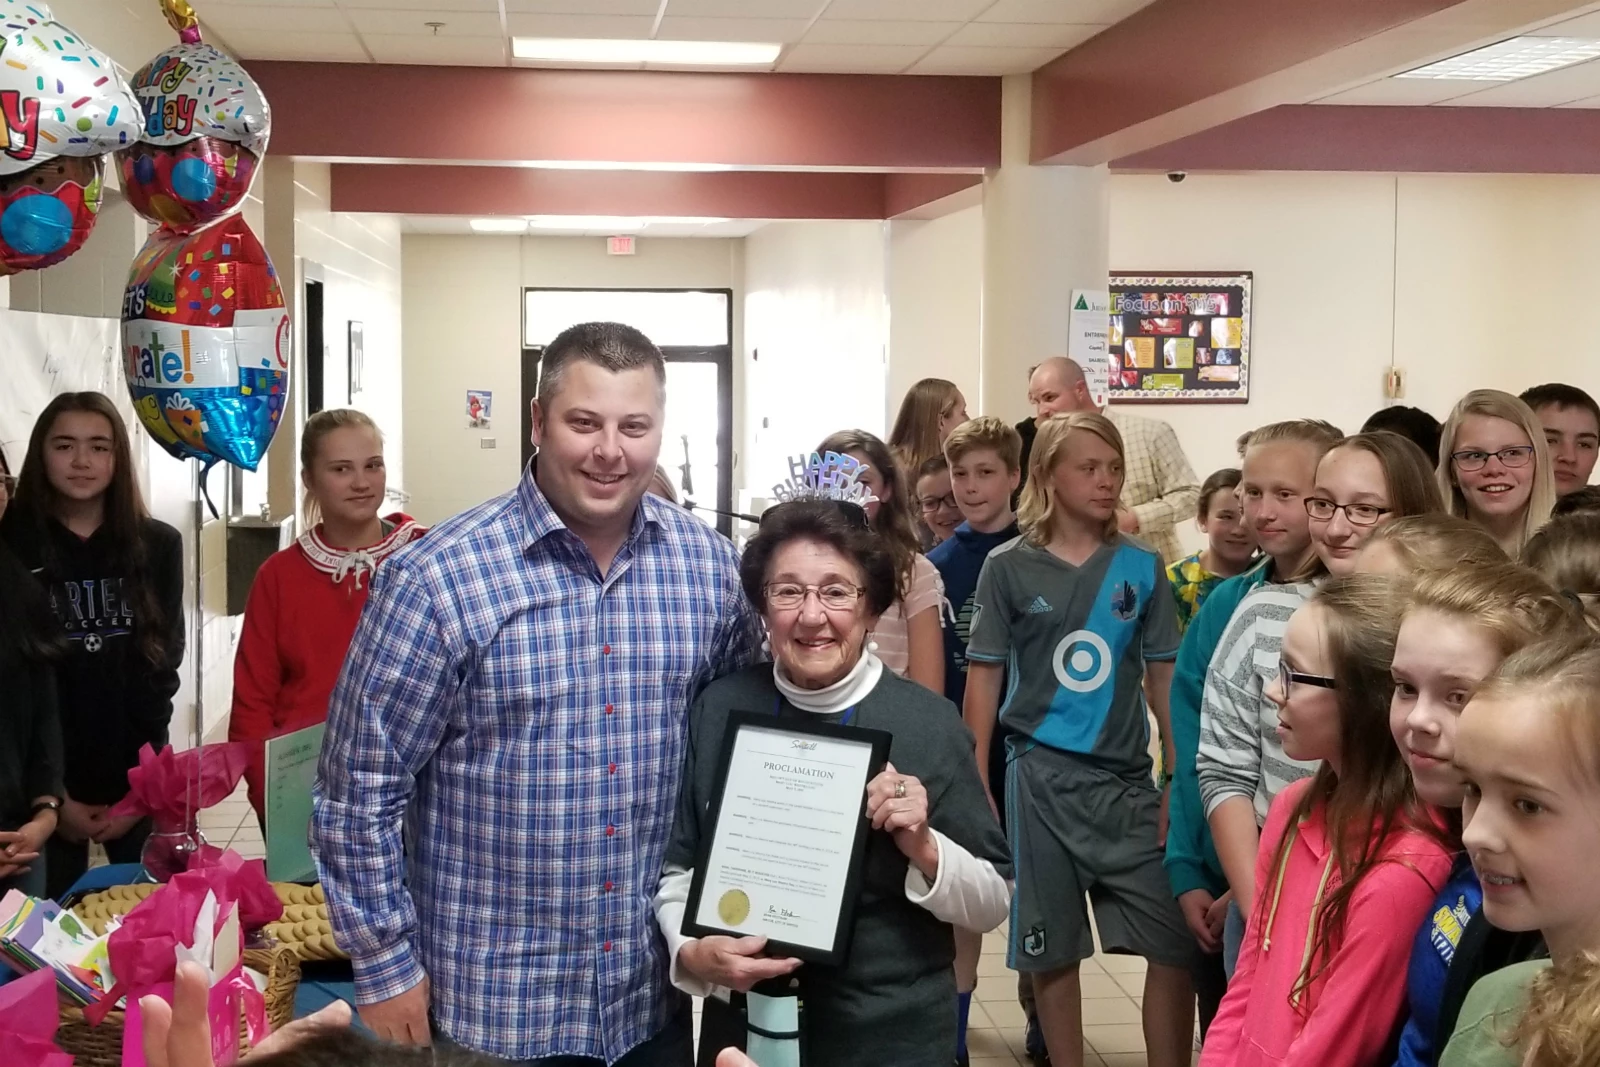 Sartell Middle School - MIX 94.9